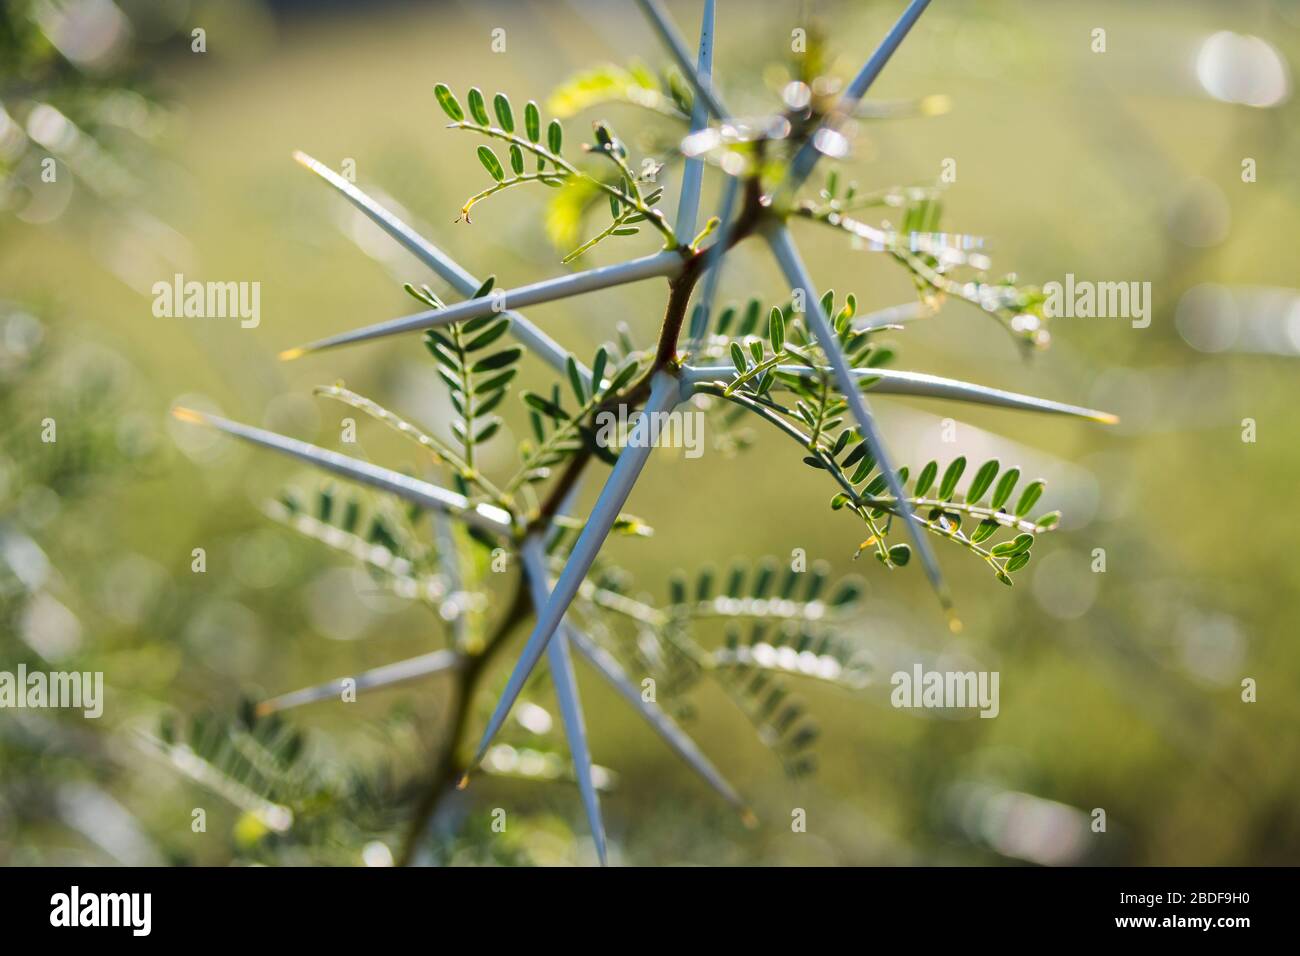 Acacia karoo or Sweet Thorn tree closeup of a branch in the morning sunlight with long white thorns Stock Photo